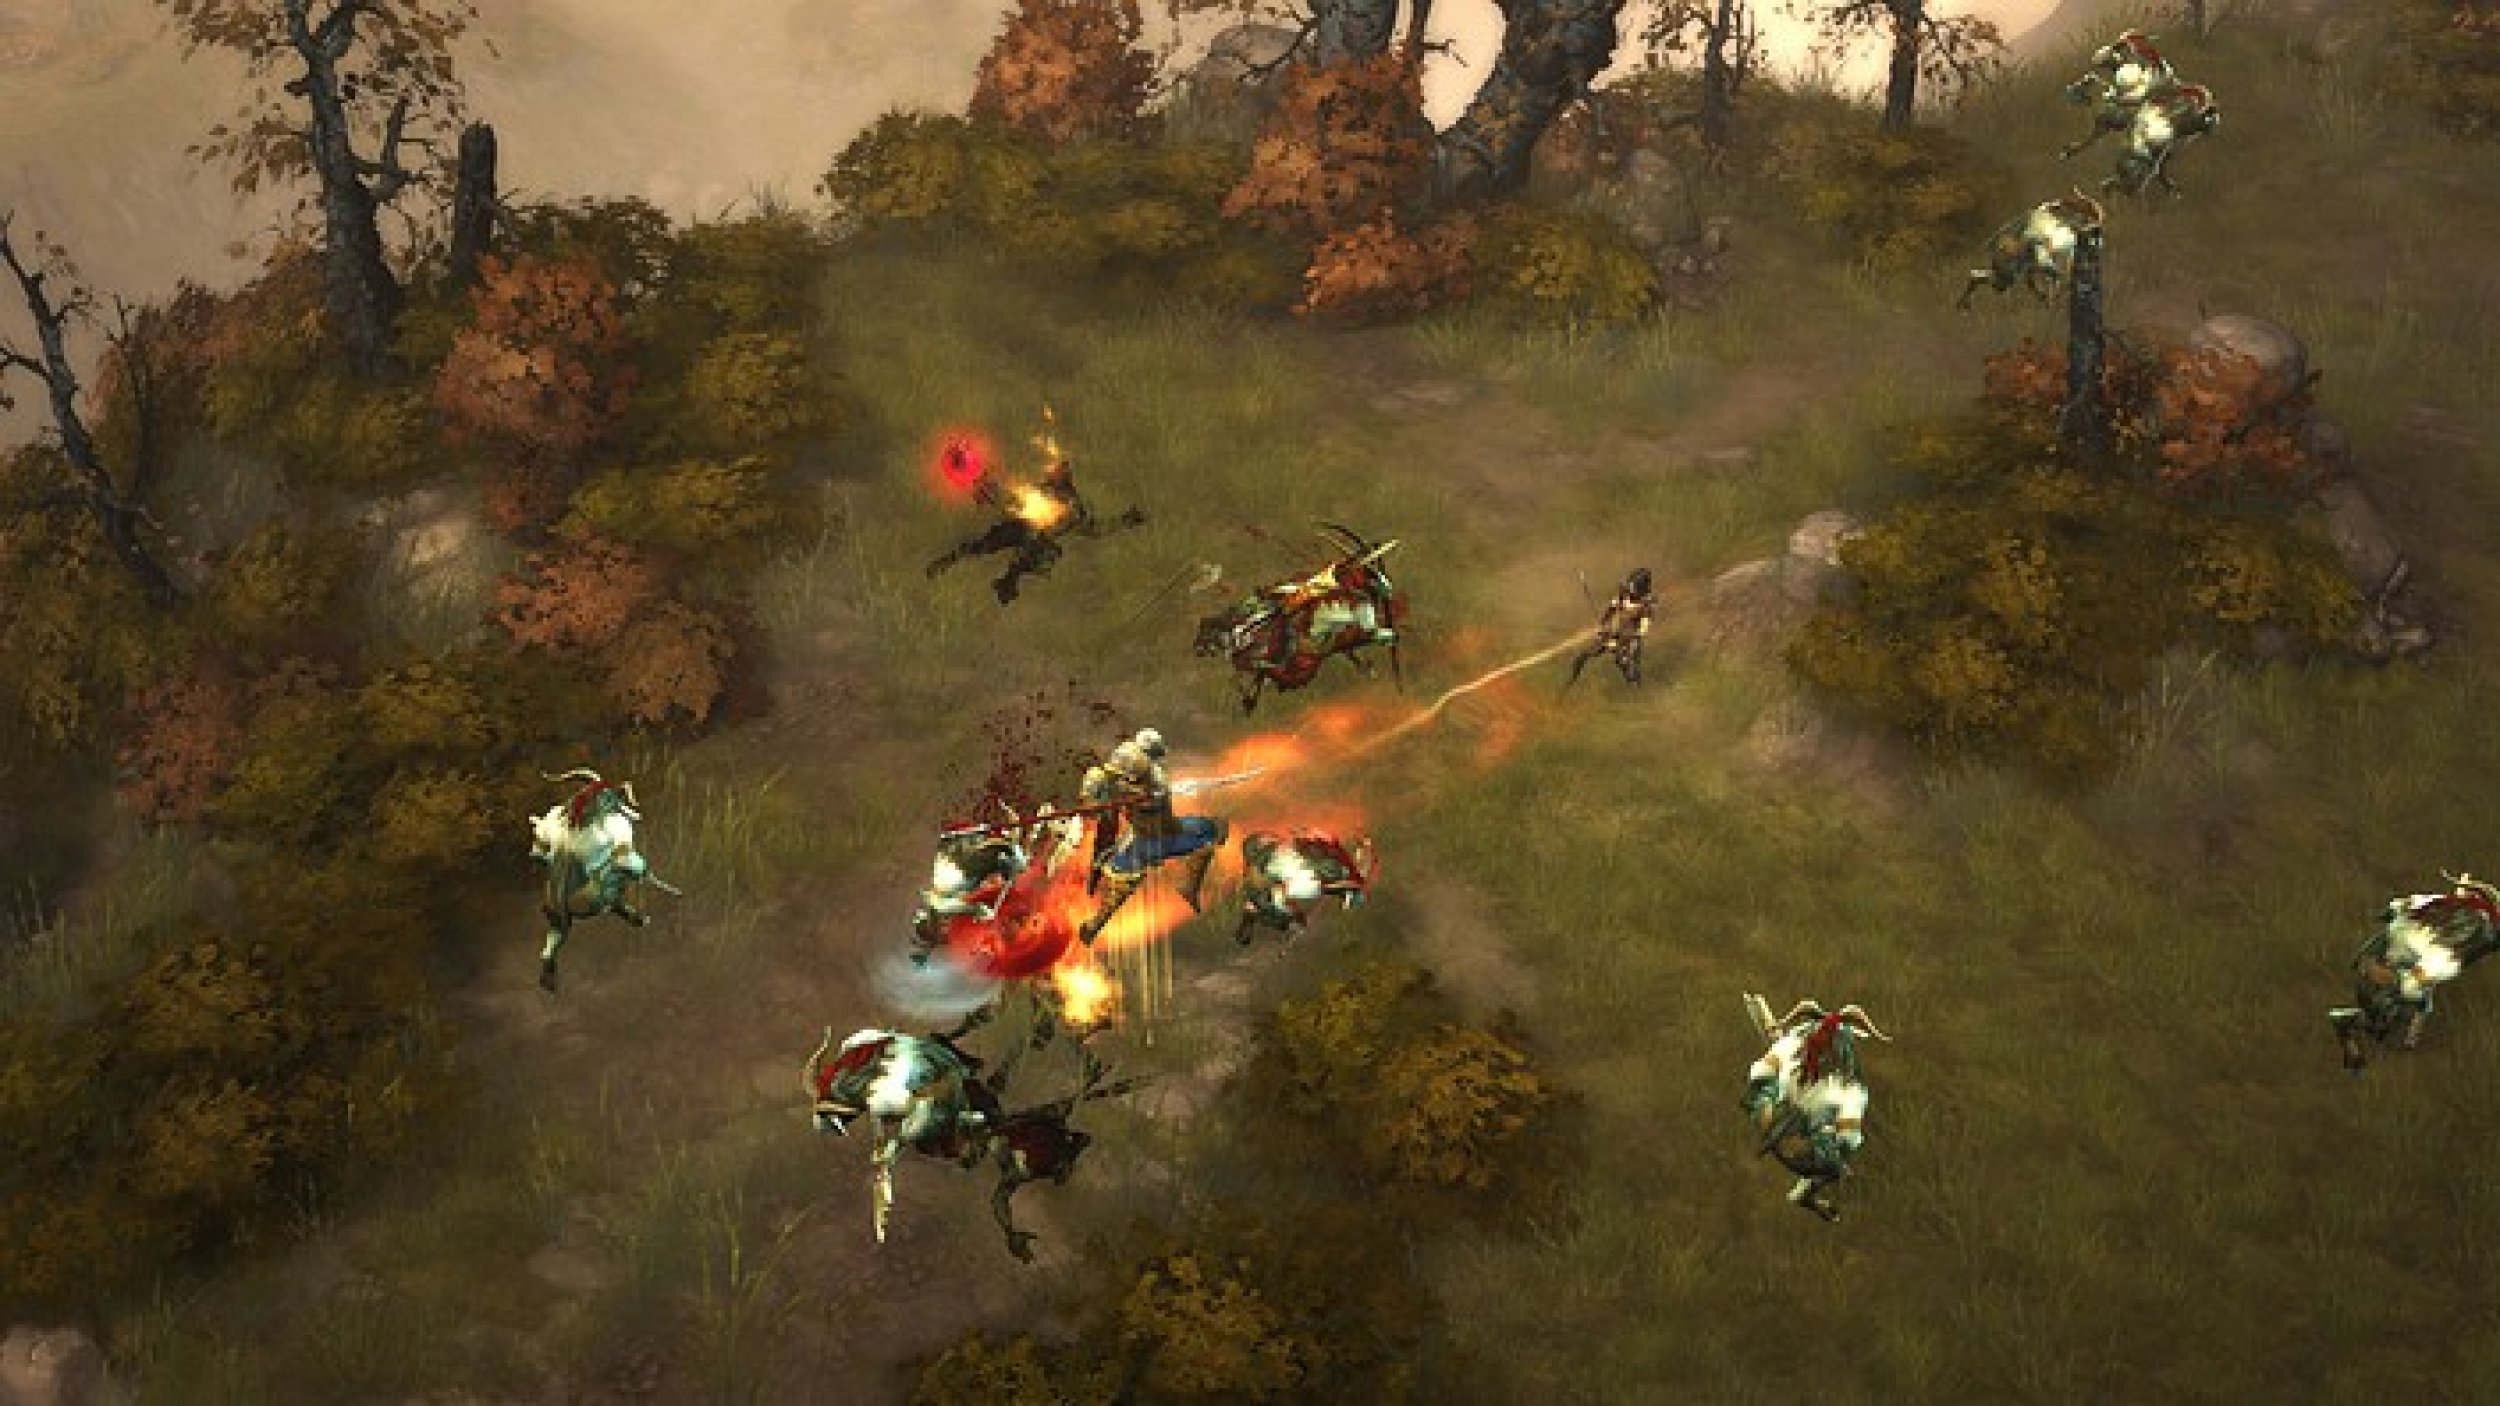 Diablo 3 Release Date Nears Beta Giveaway Launches, Will This Mean More Bugs